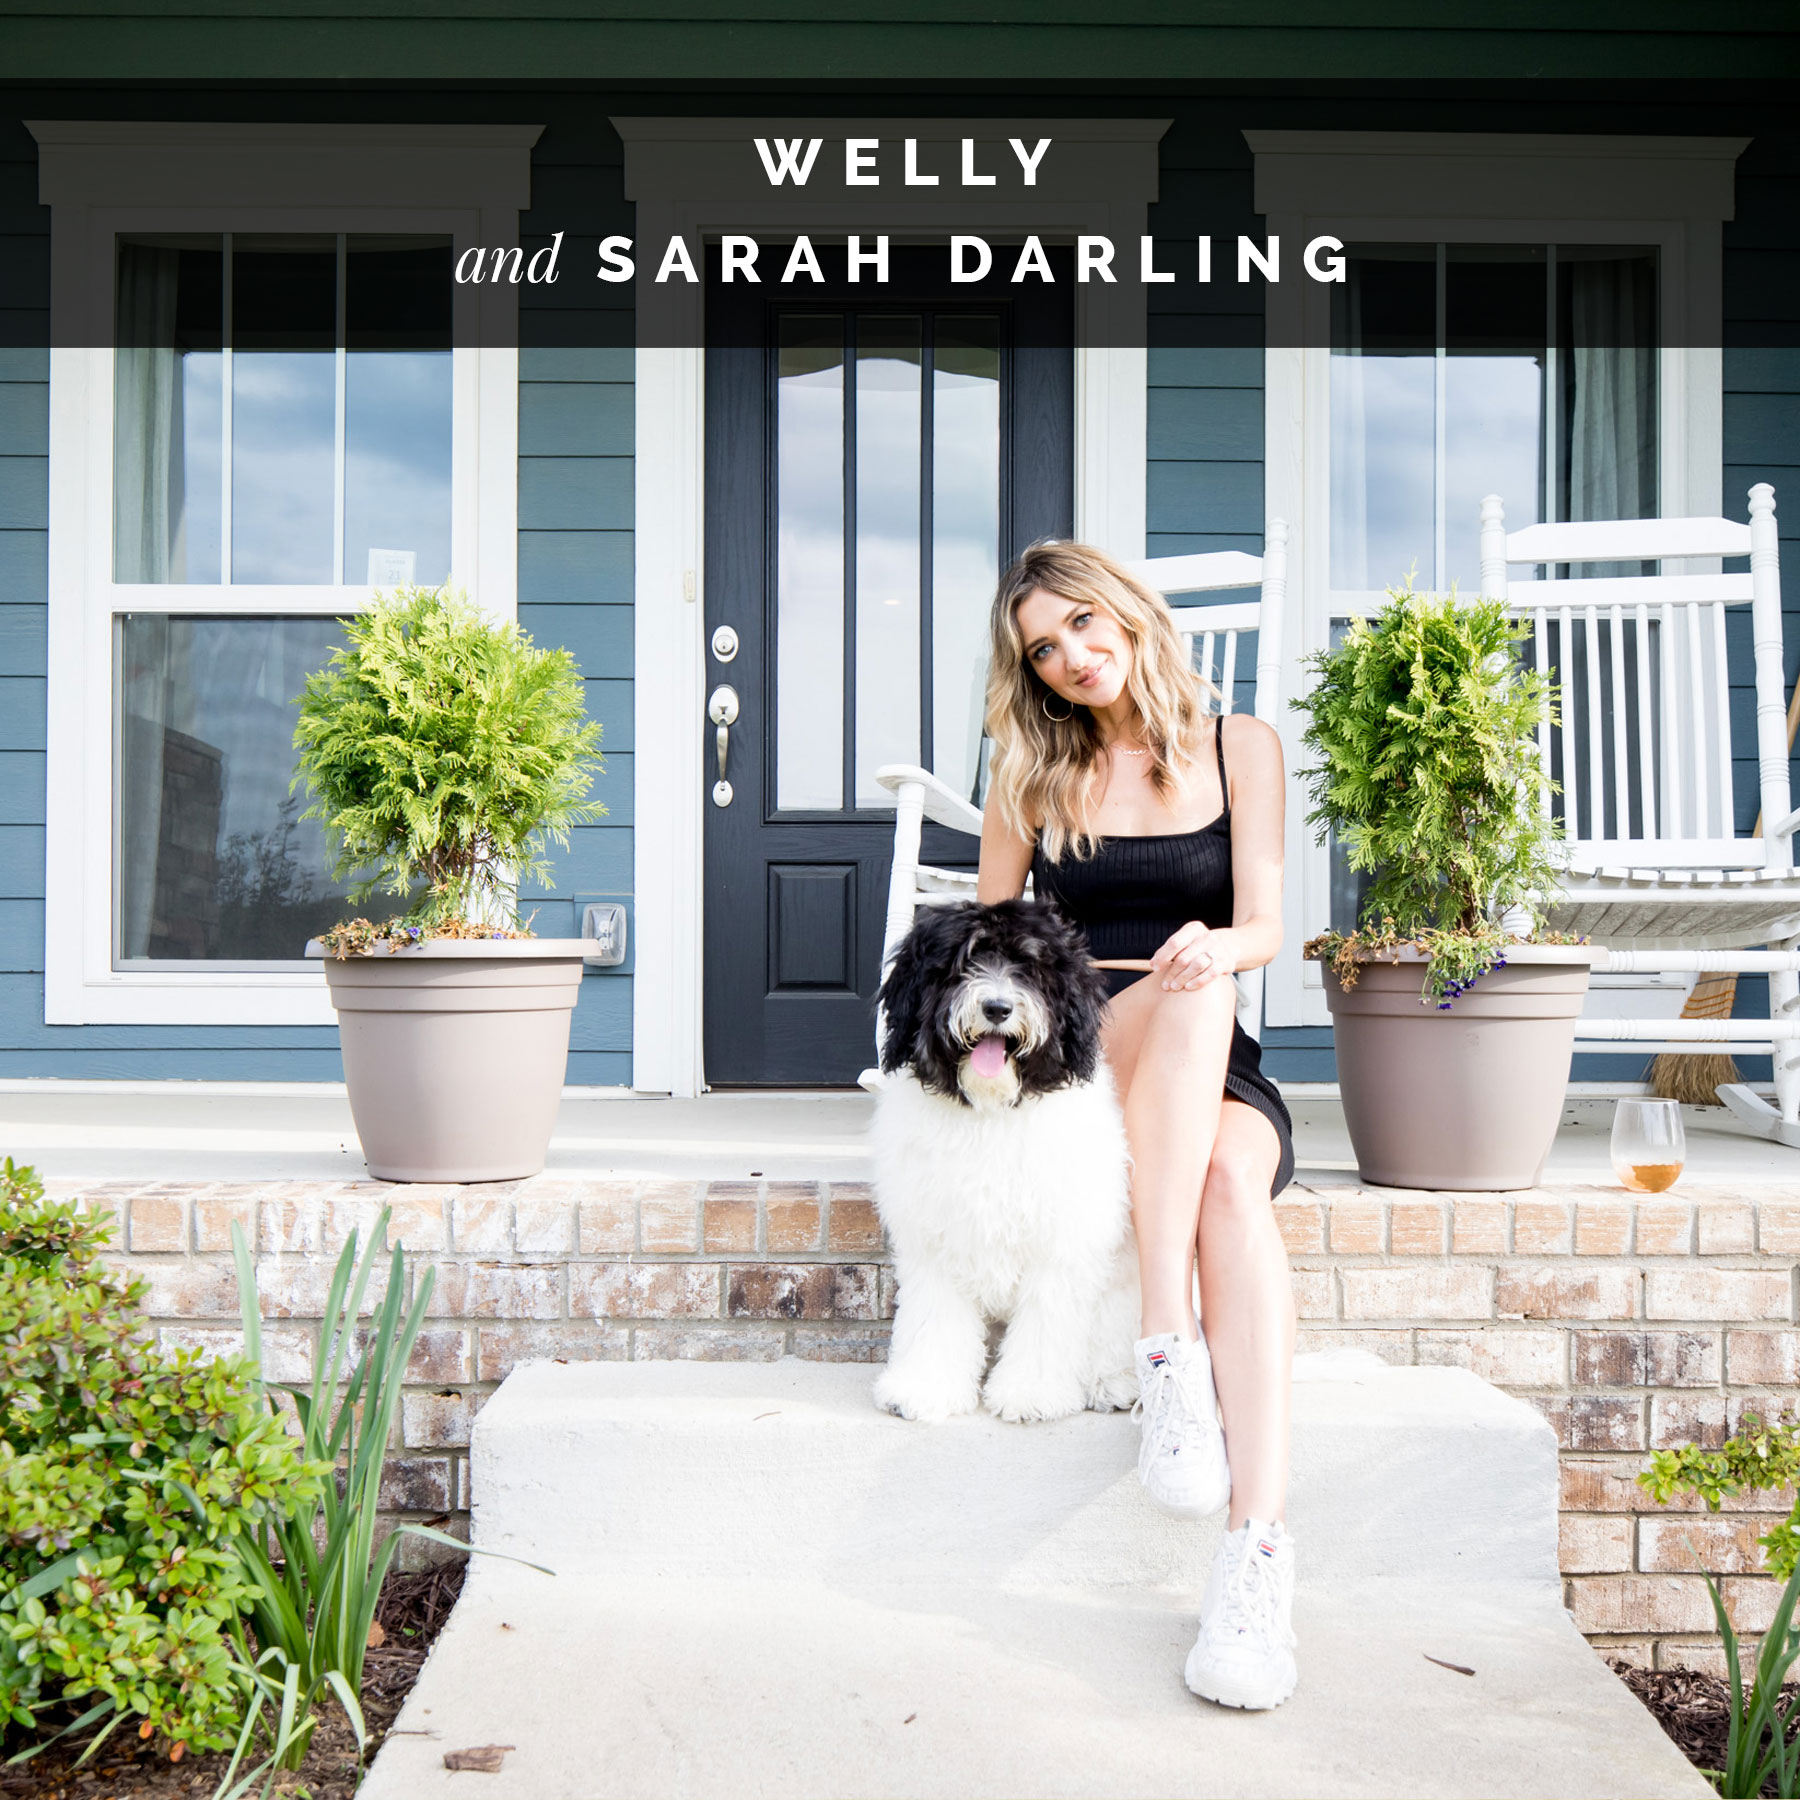 sarah darling and her dog, welly